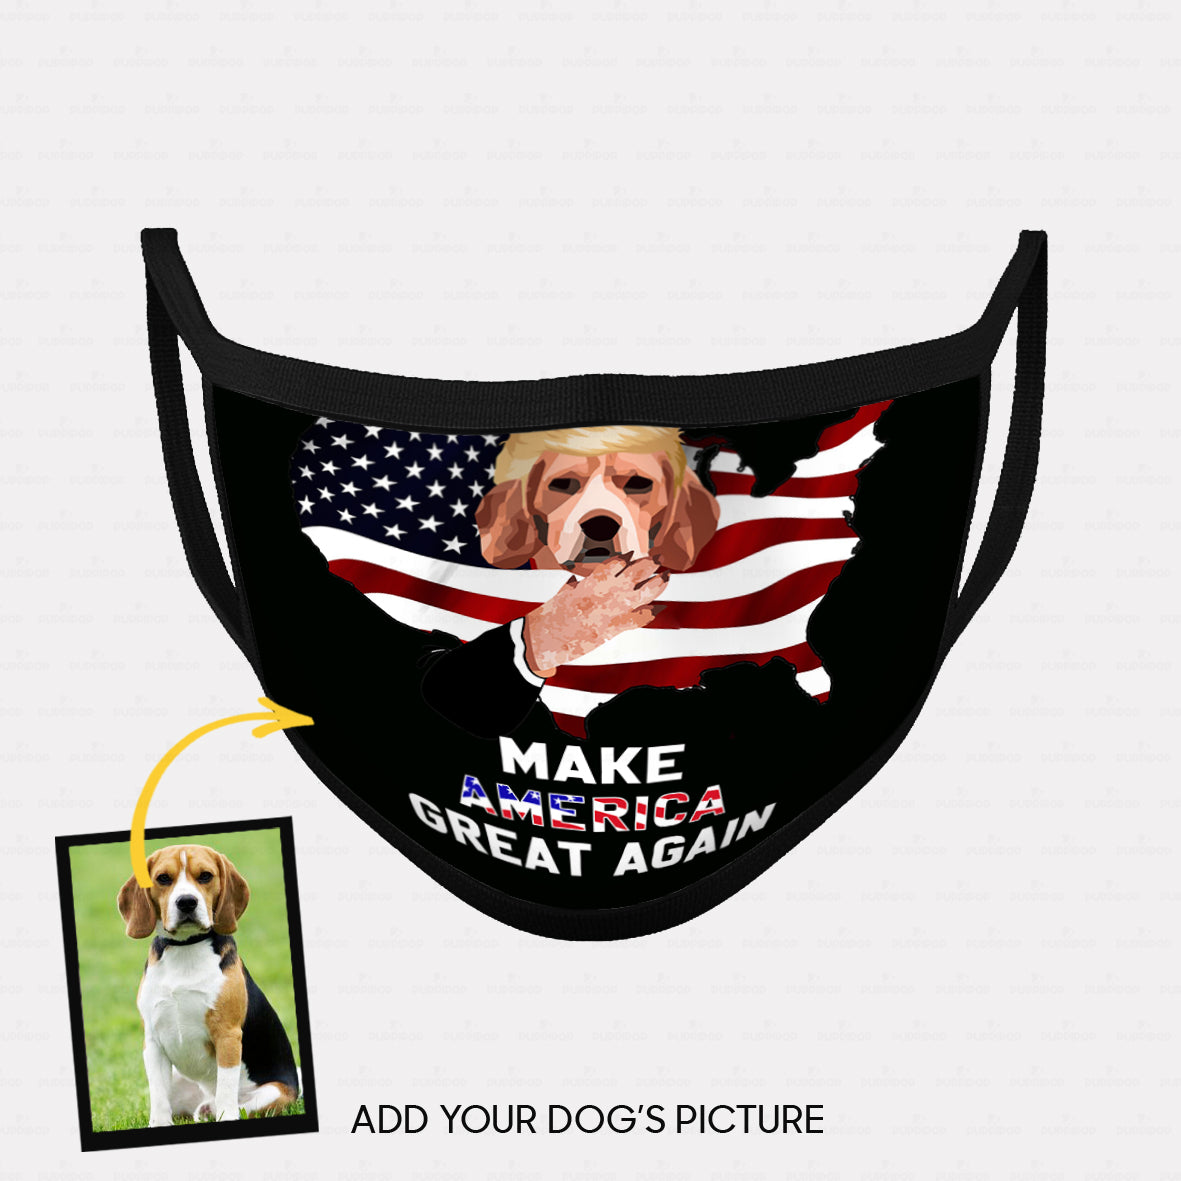 Personalized Dog Gift Idea - Make America Great Again With Dog President For Dog Lovers - Cloth Mask